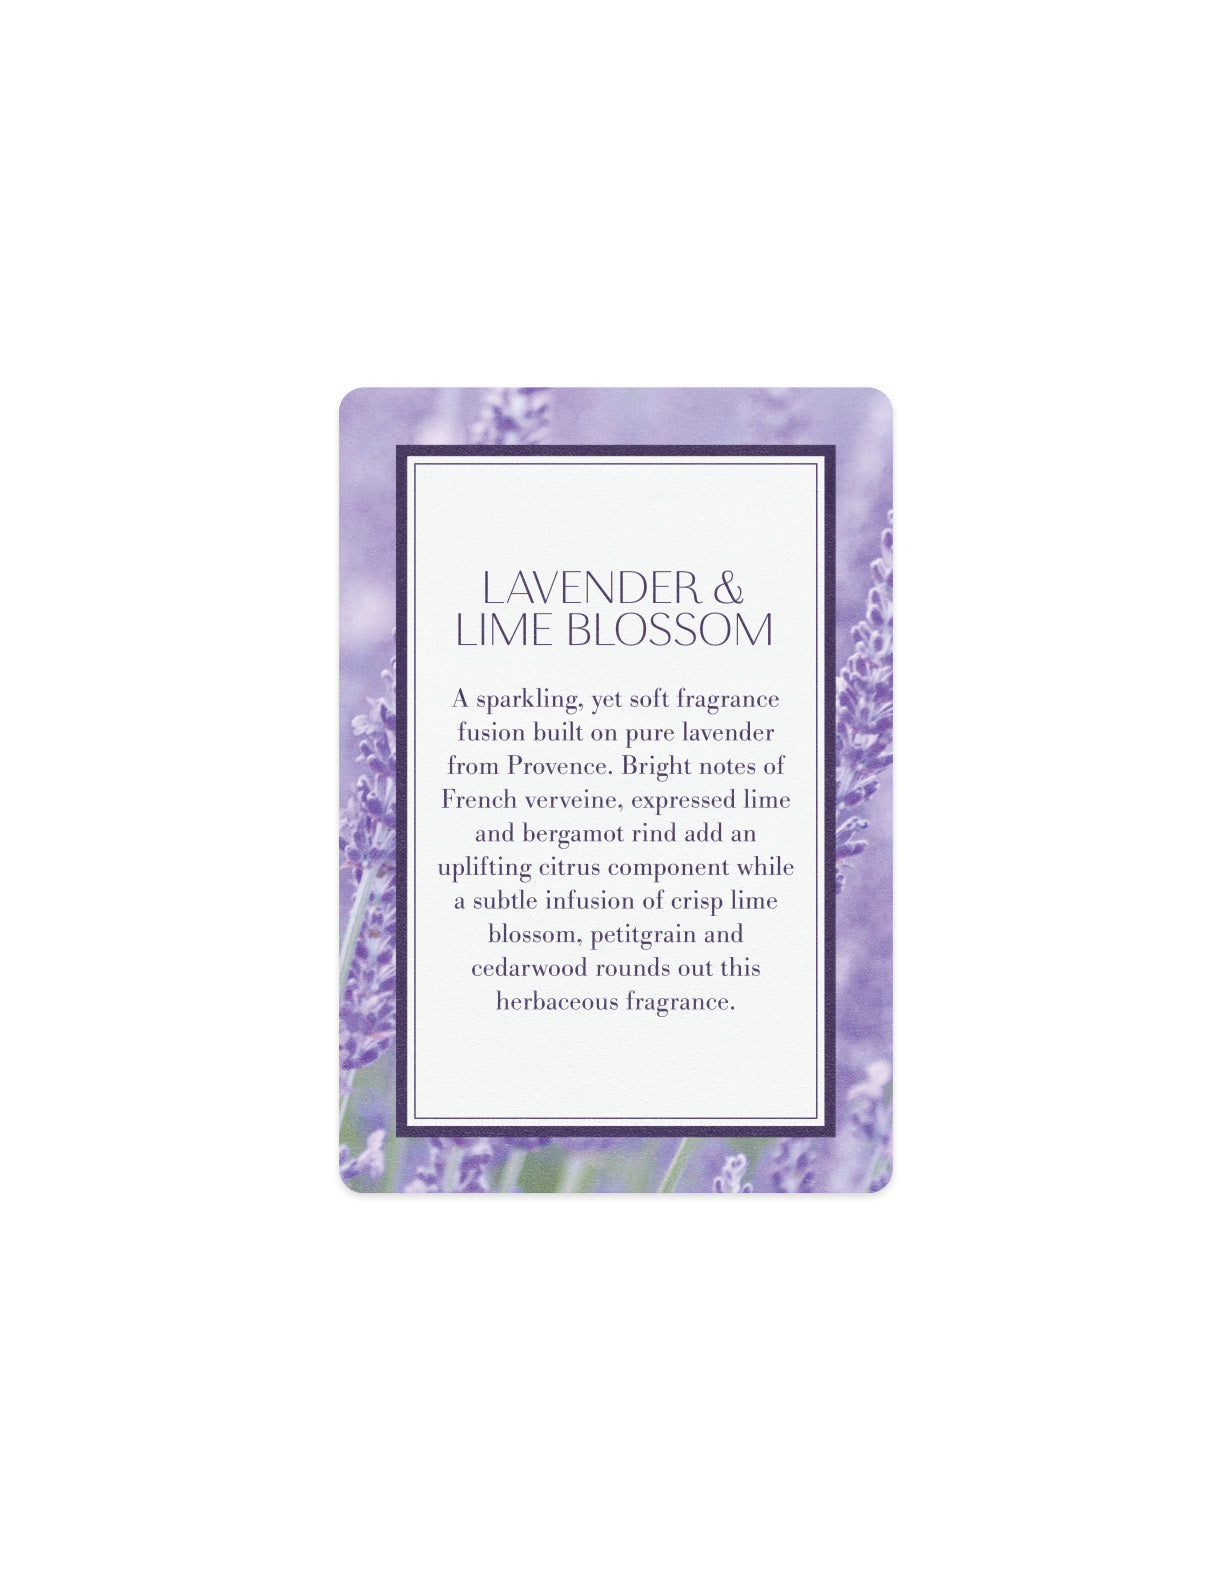 GWP - Scented Card - Lavender & Lime Blossom